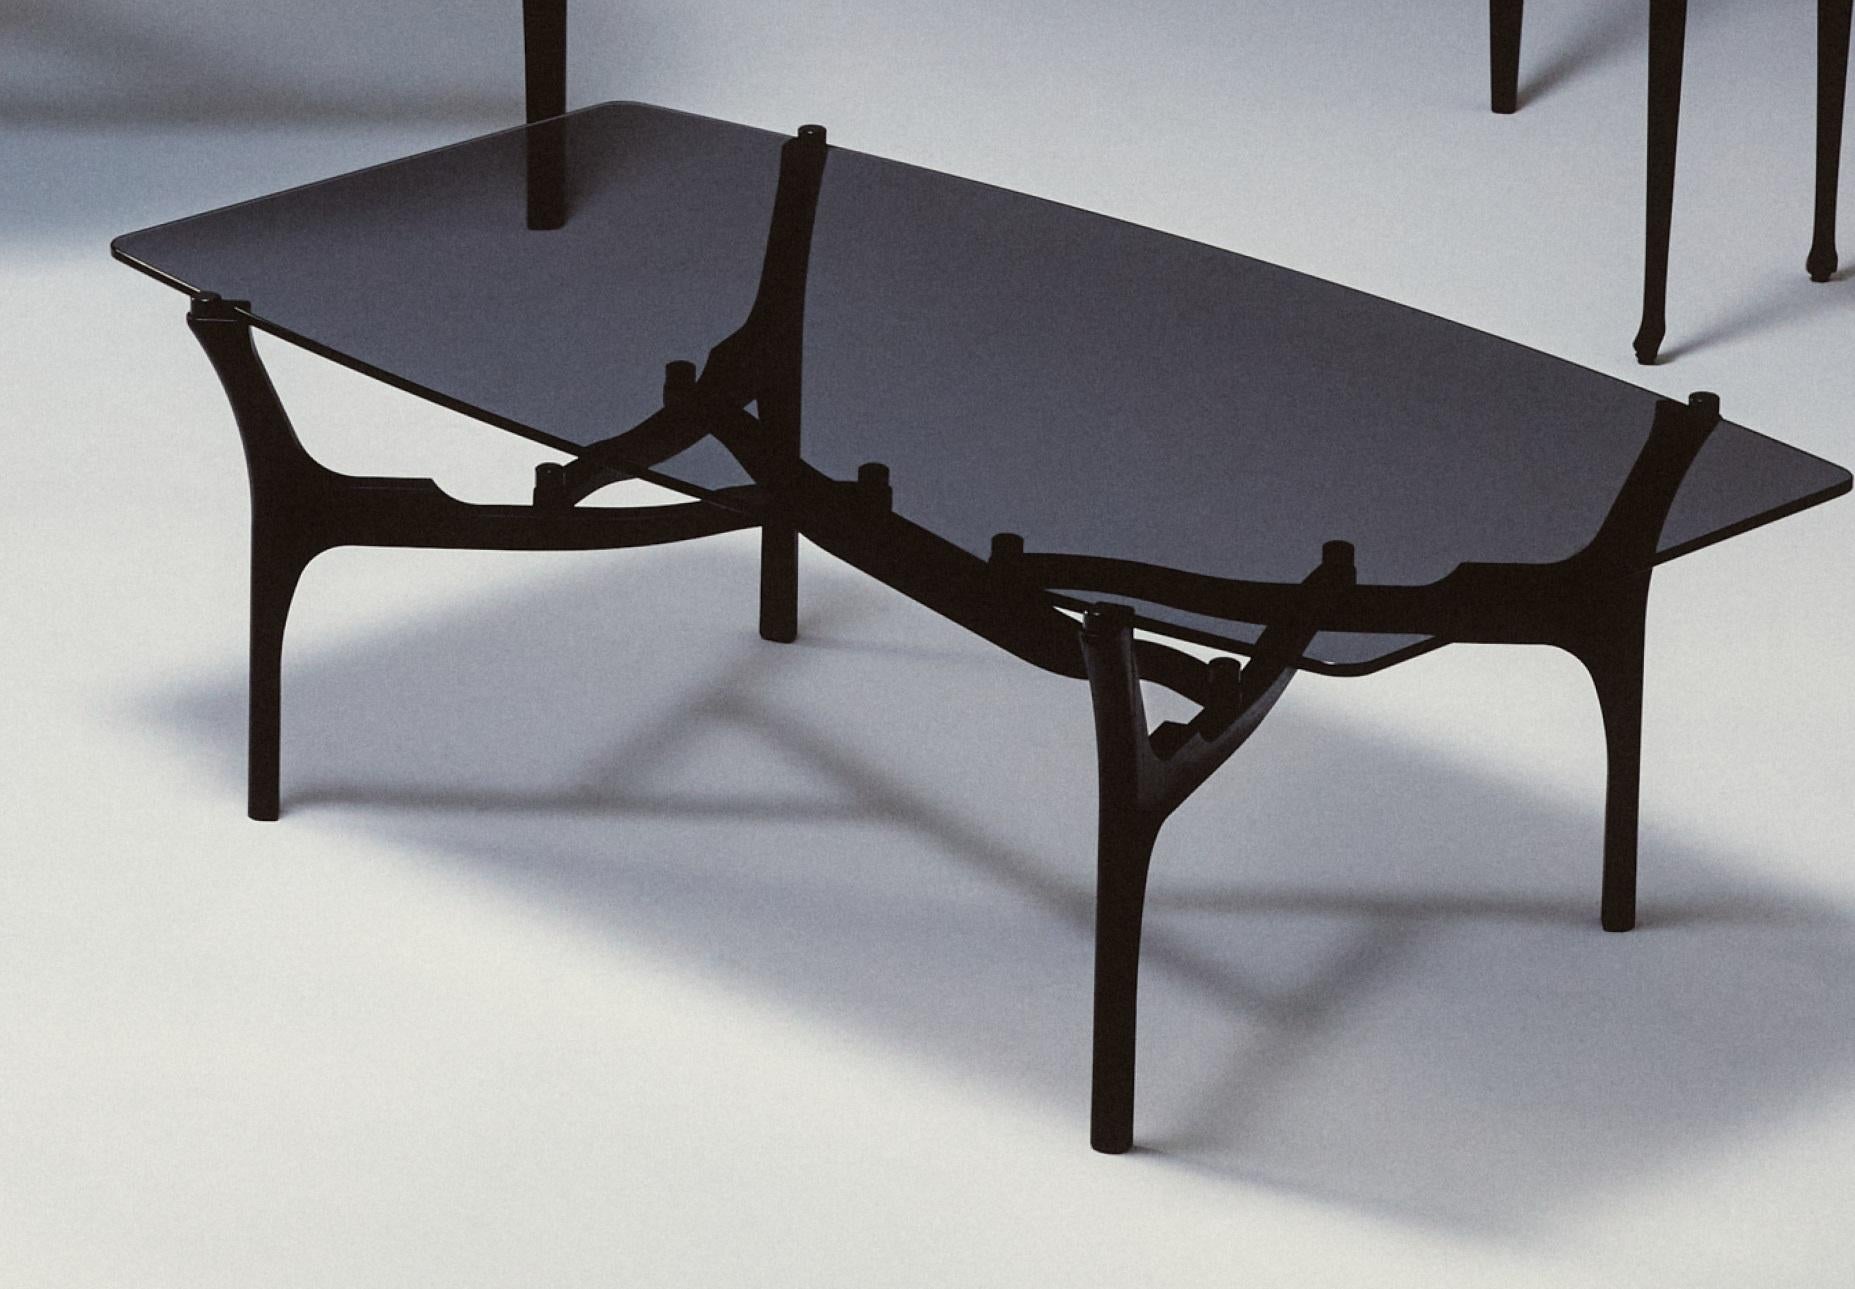 Carlina Low Table by Oscar Tusquets
Dimensions: D 72 x W 130 x H 42 cm.
Materials: Solid ash timber and tempered smoked glass.

Solid ash timber structure, stained black. 1 cm Thick tempered smoked glass top.

Gaulino Family
Distinctive